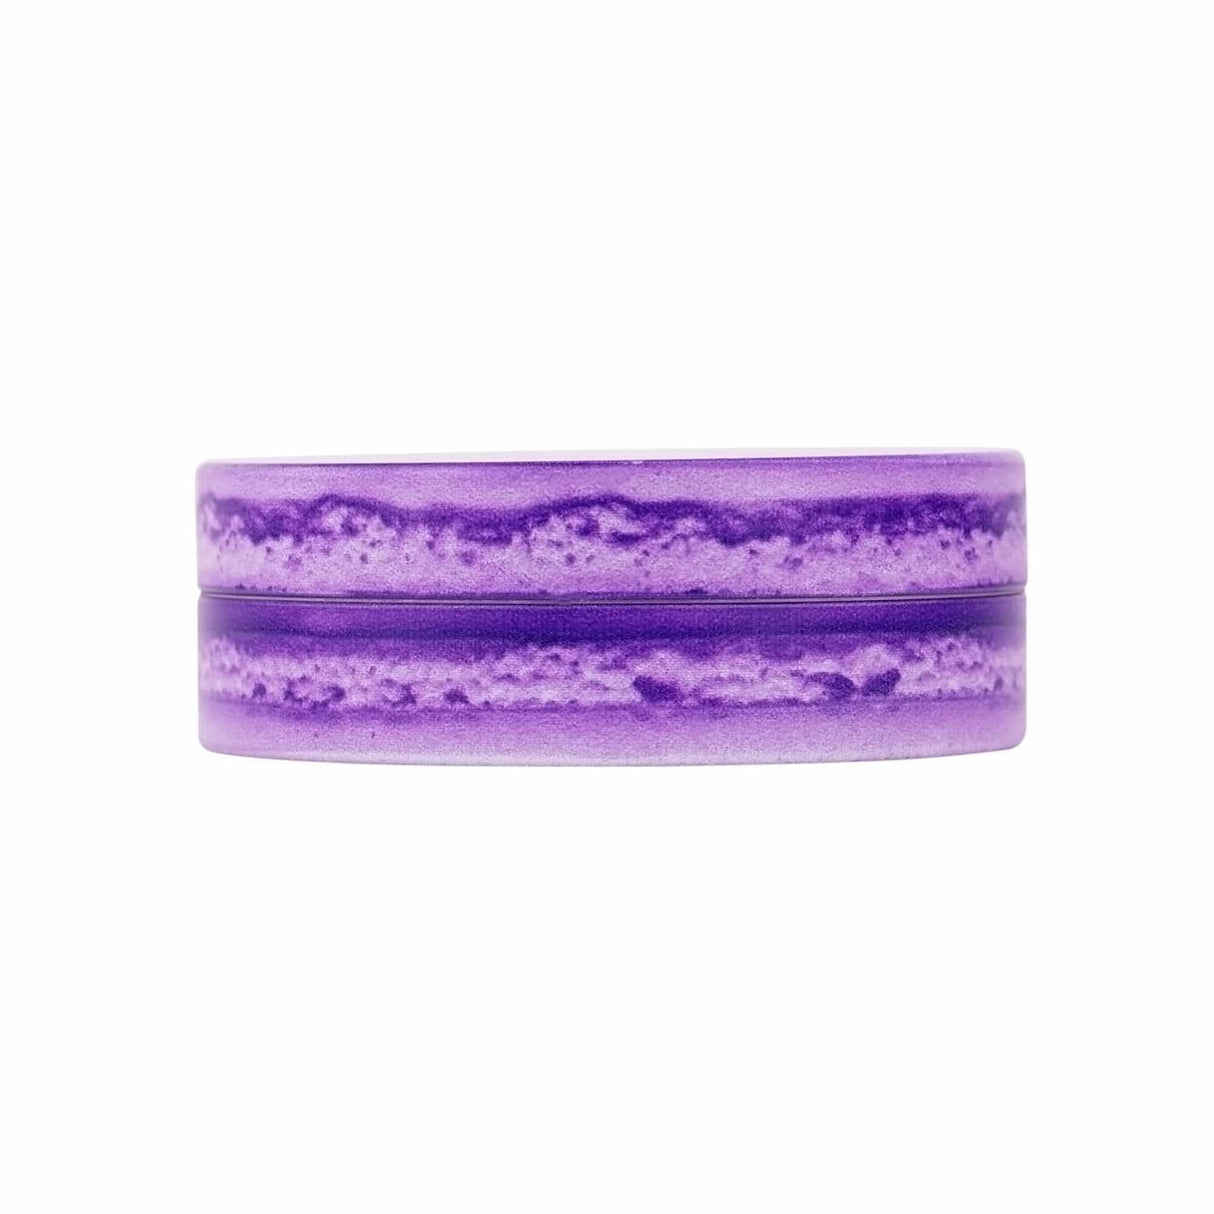 V Syndicate Macaron Lavender 2-Piece SharpShred Grinder, Compact and Portable, Front View